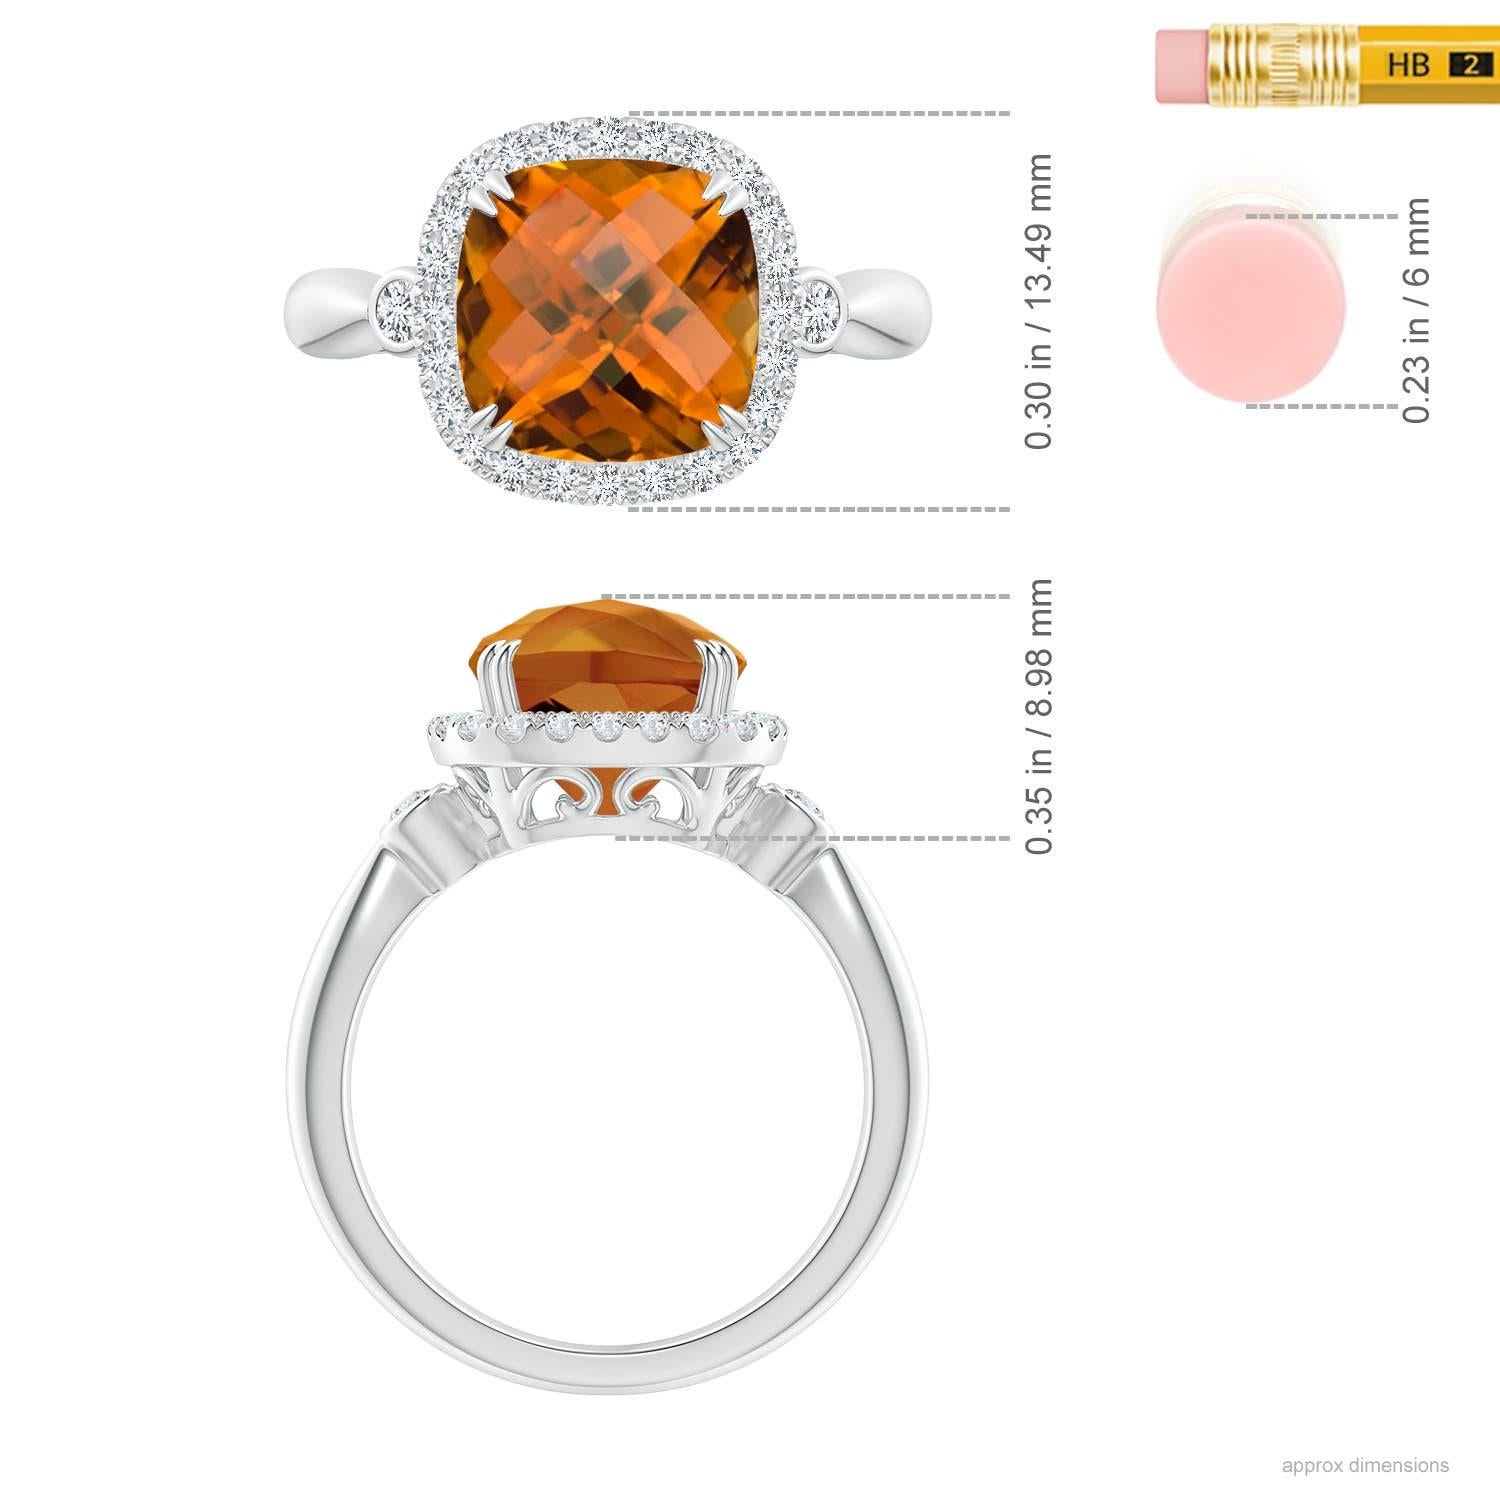 For Sale:  Angara GIA Certified Natural Cushion Orange Zircon Ring in White Gold 5